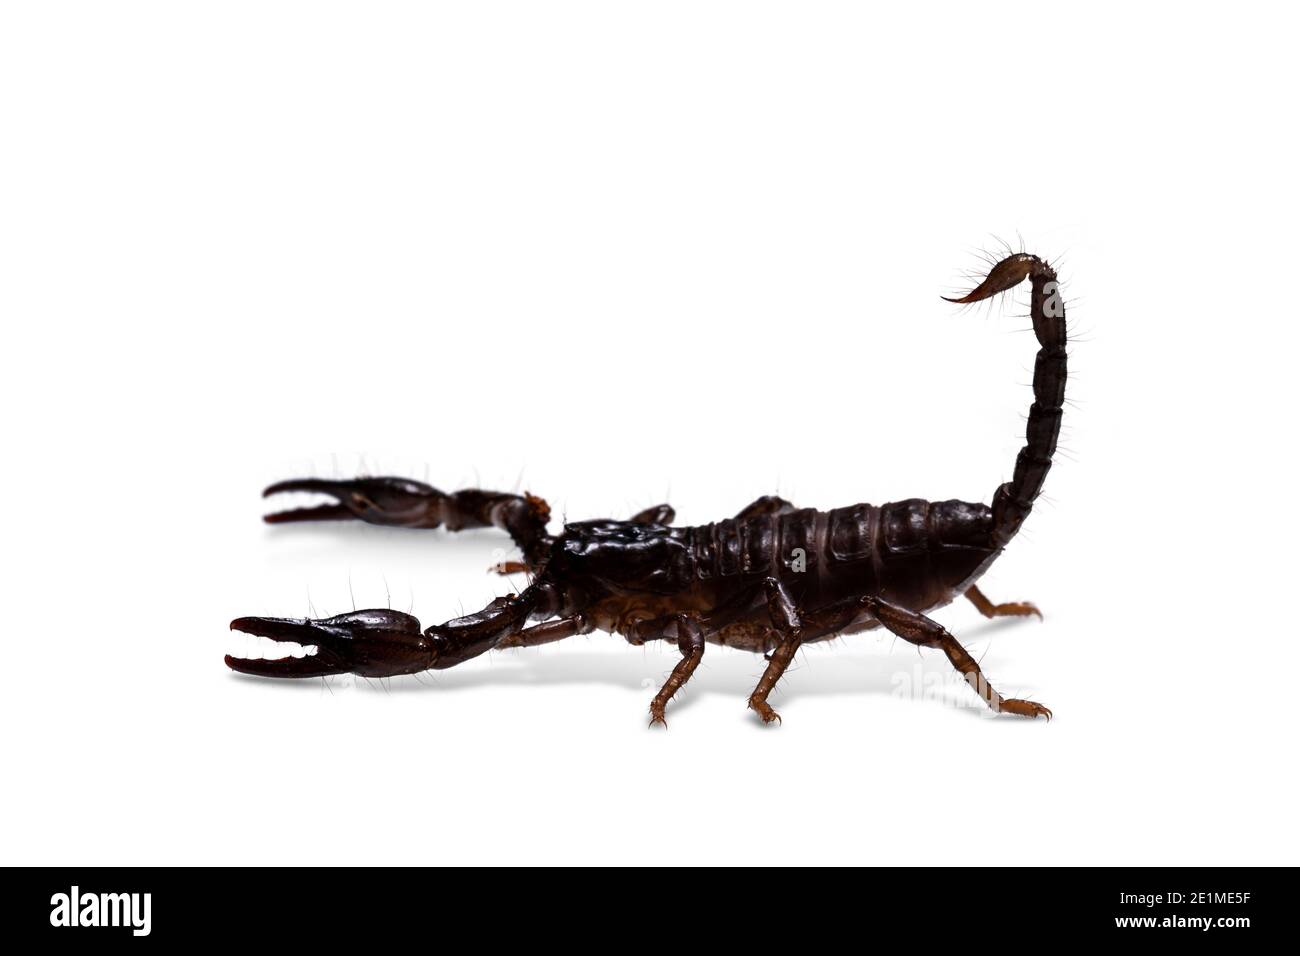 Side view of young Asian forest scorpion in agressive defense pose. Isolated on white background. Stock Photo